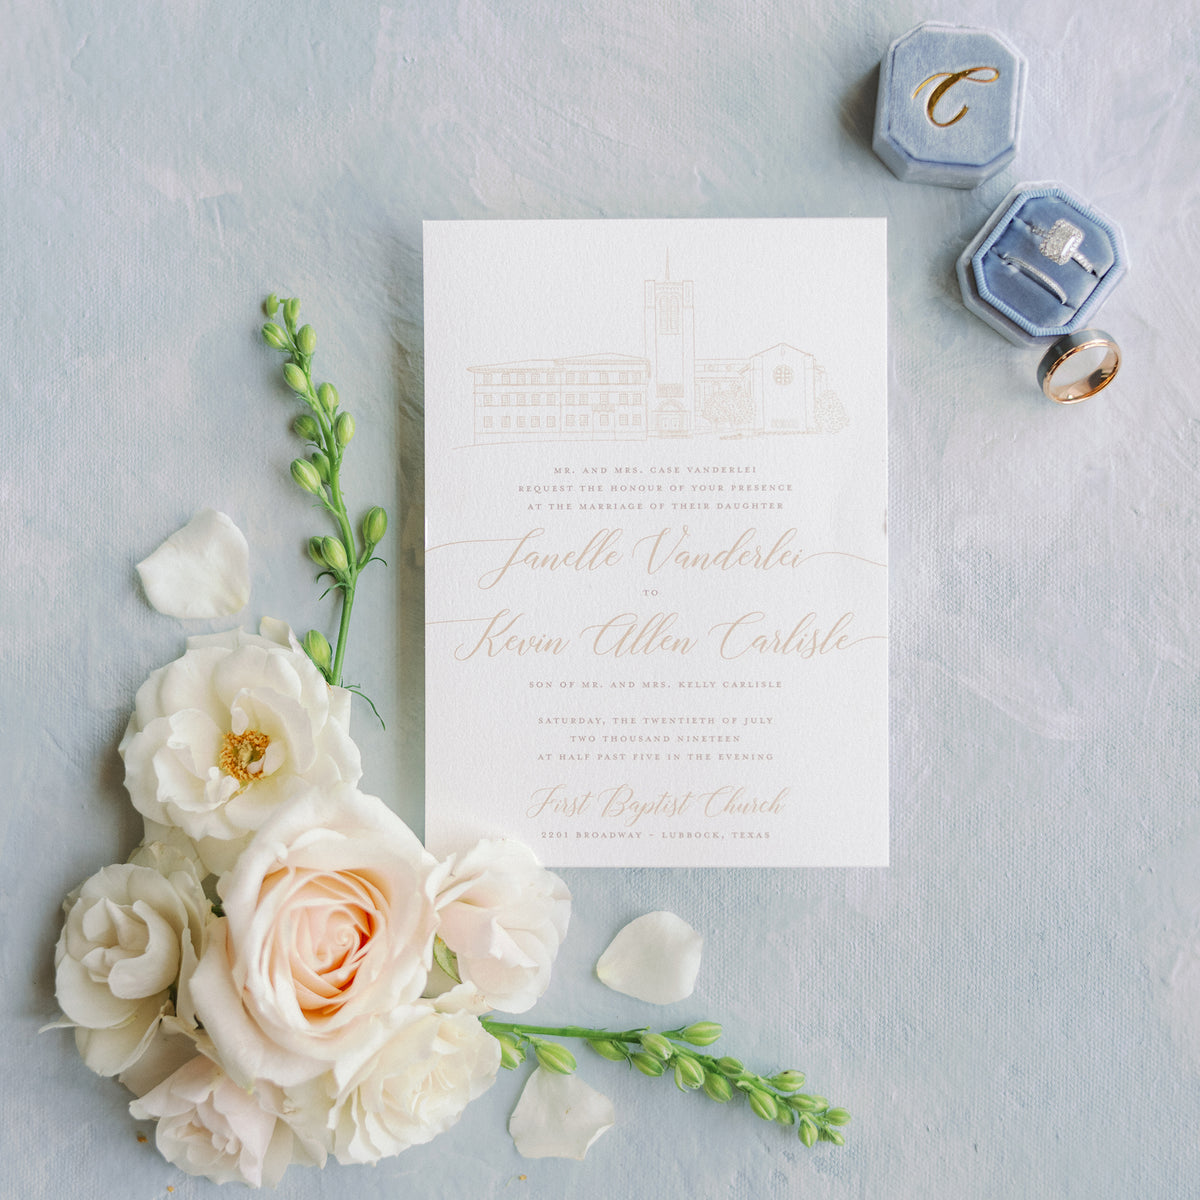 Venue Sketch Wedding Invitation of Eberley Brooks in Lubbock, Texas by Scotti Cline Designs. Photo by May Carlson Photography. 